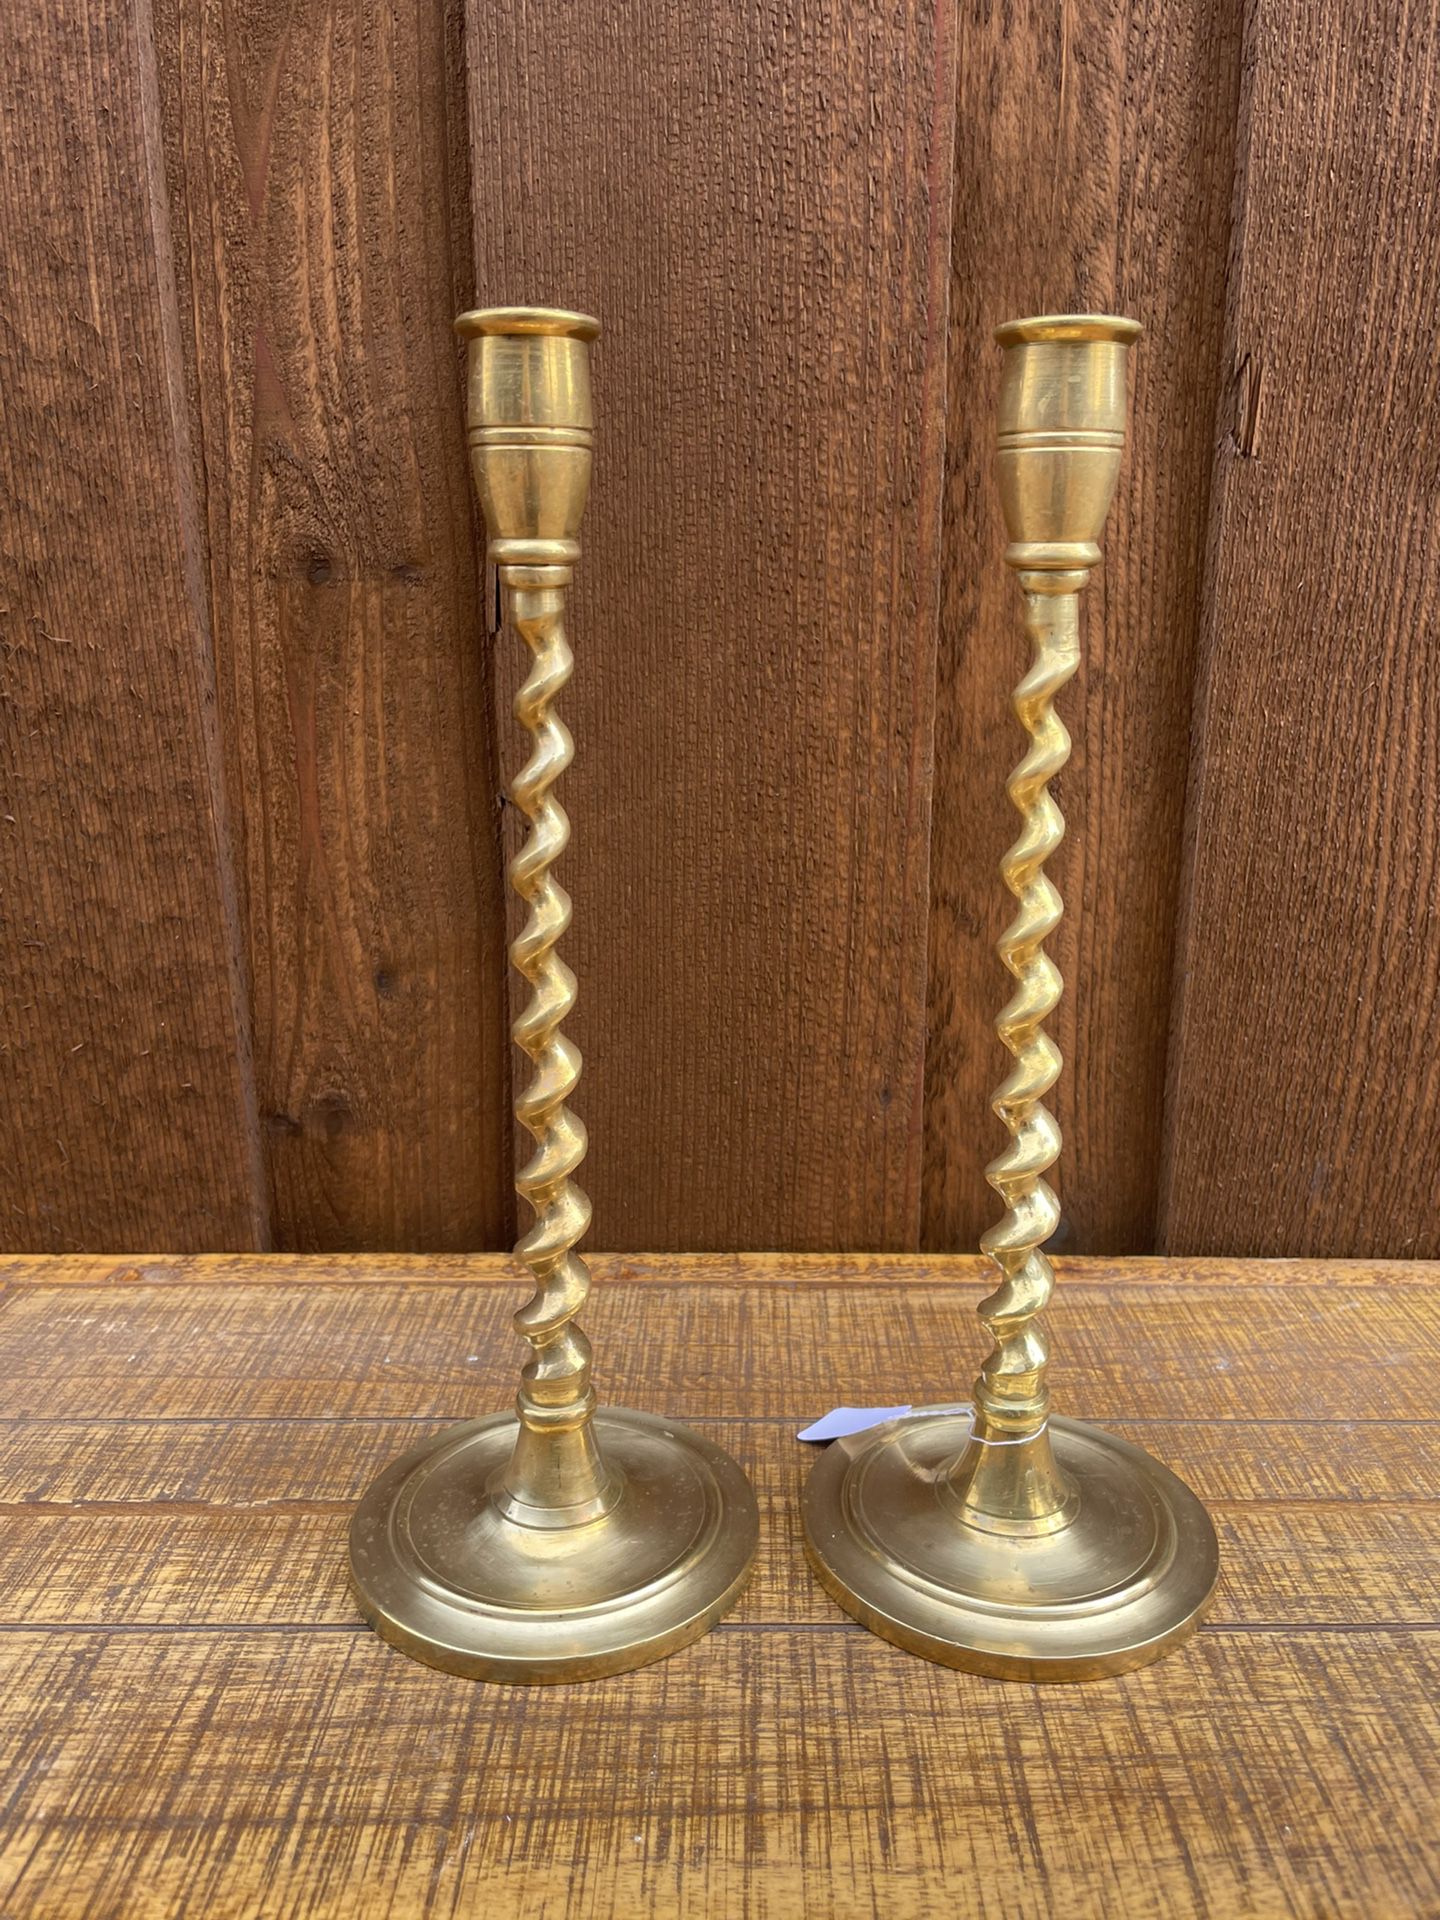 Vintage Barley Twist Candlesticks  Solid NY Brass Candlesticks for Sale in  Lucas, TX - OfferUp